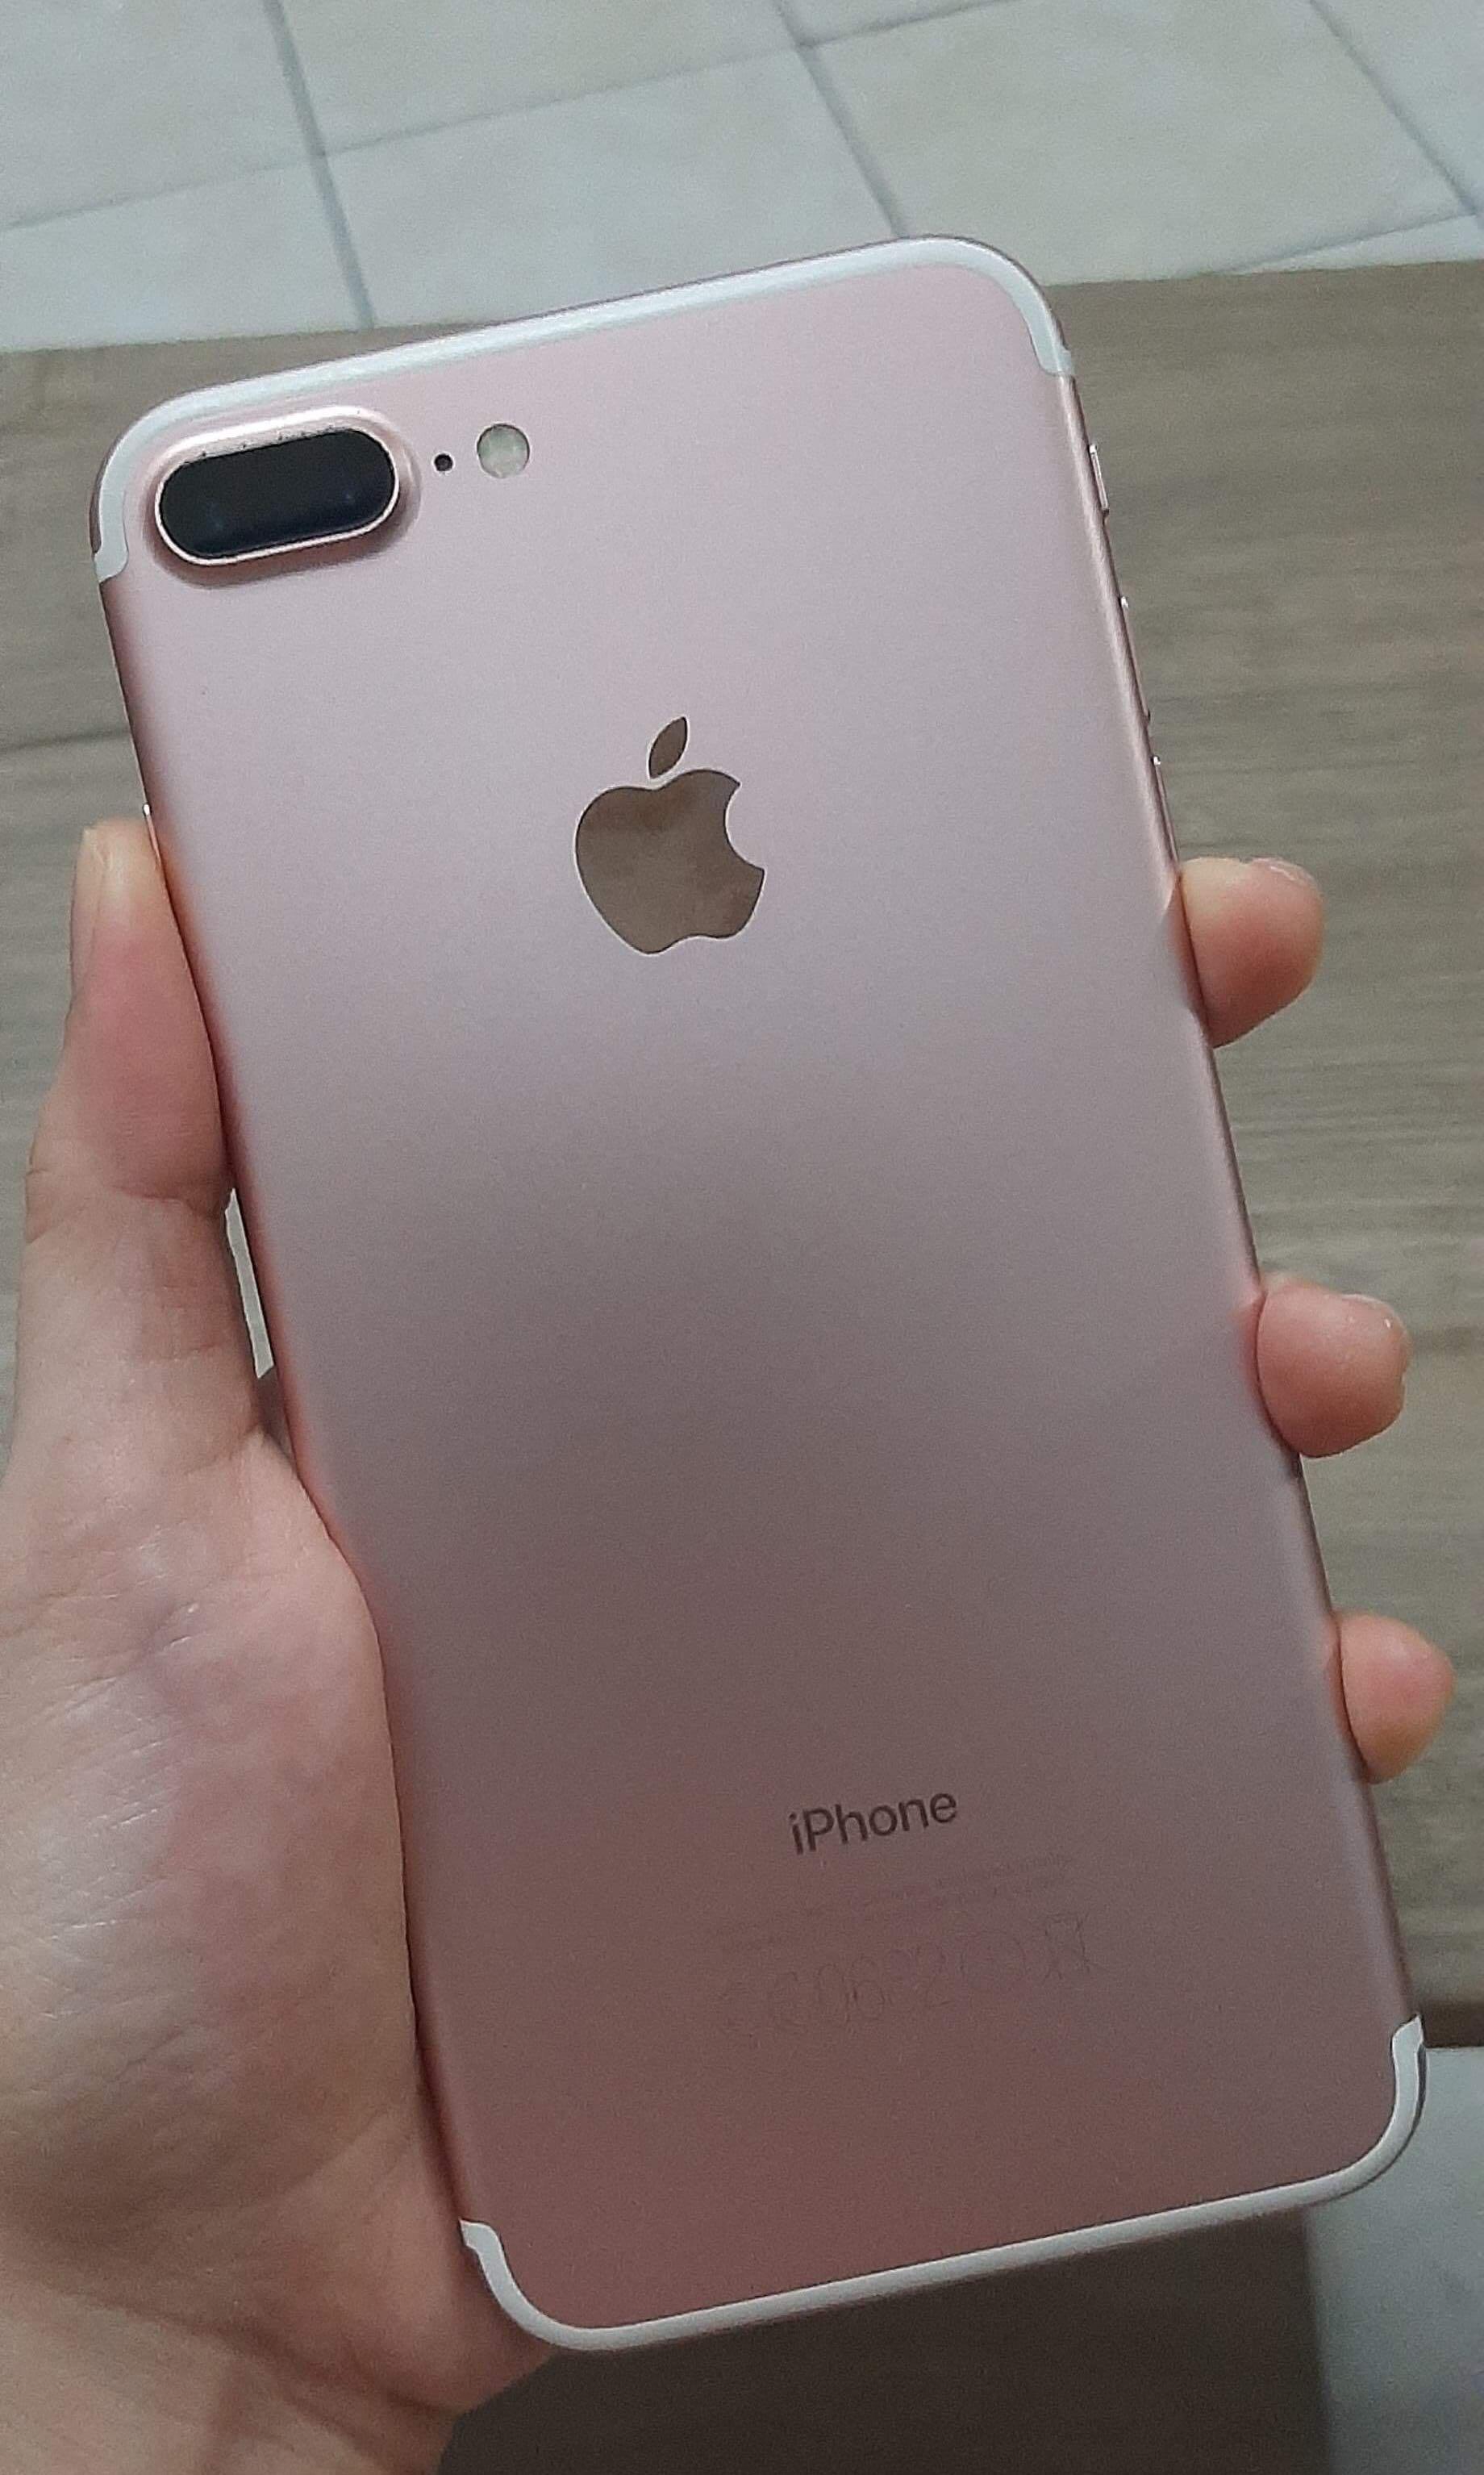 Iphone 7 Plus Rose Gold 128gb Lady Owned Mobile Phones Gadgets Mobile Phones Iphone Iphone 7 Series On Carousell